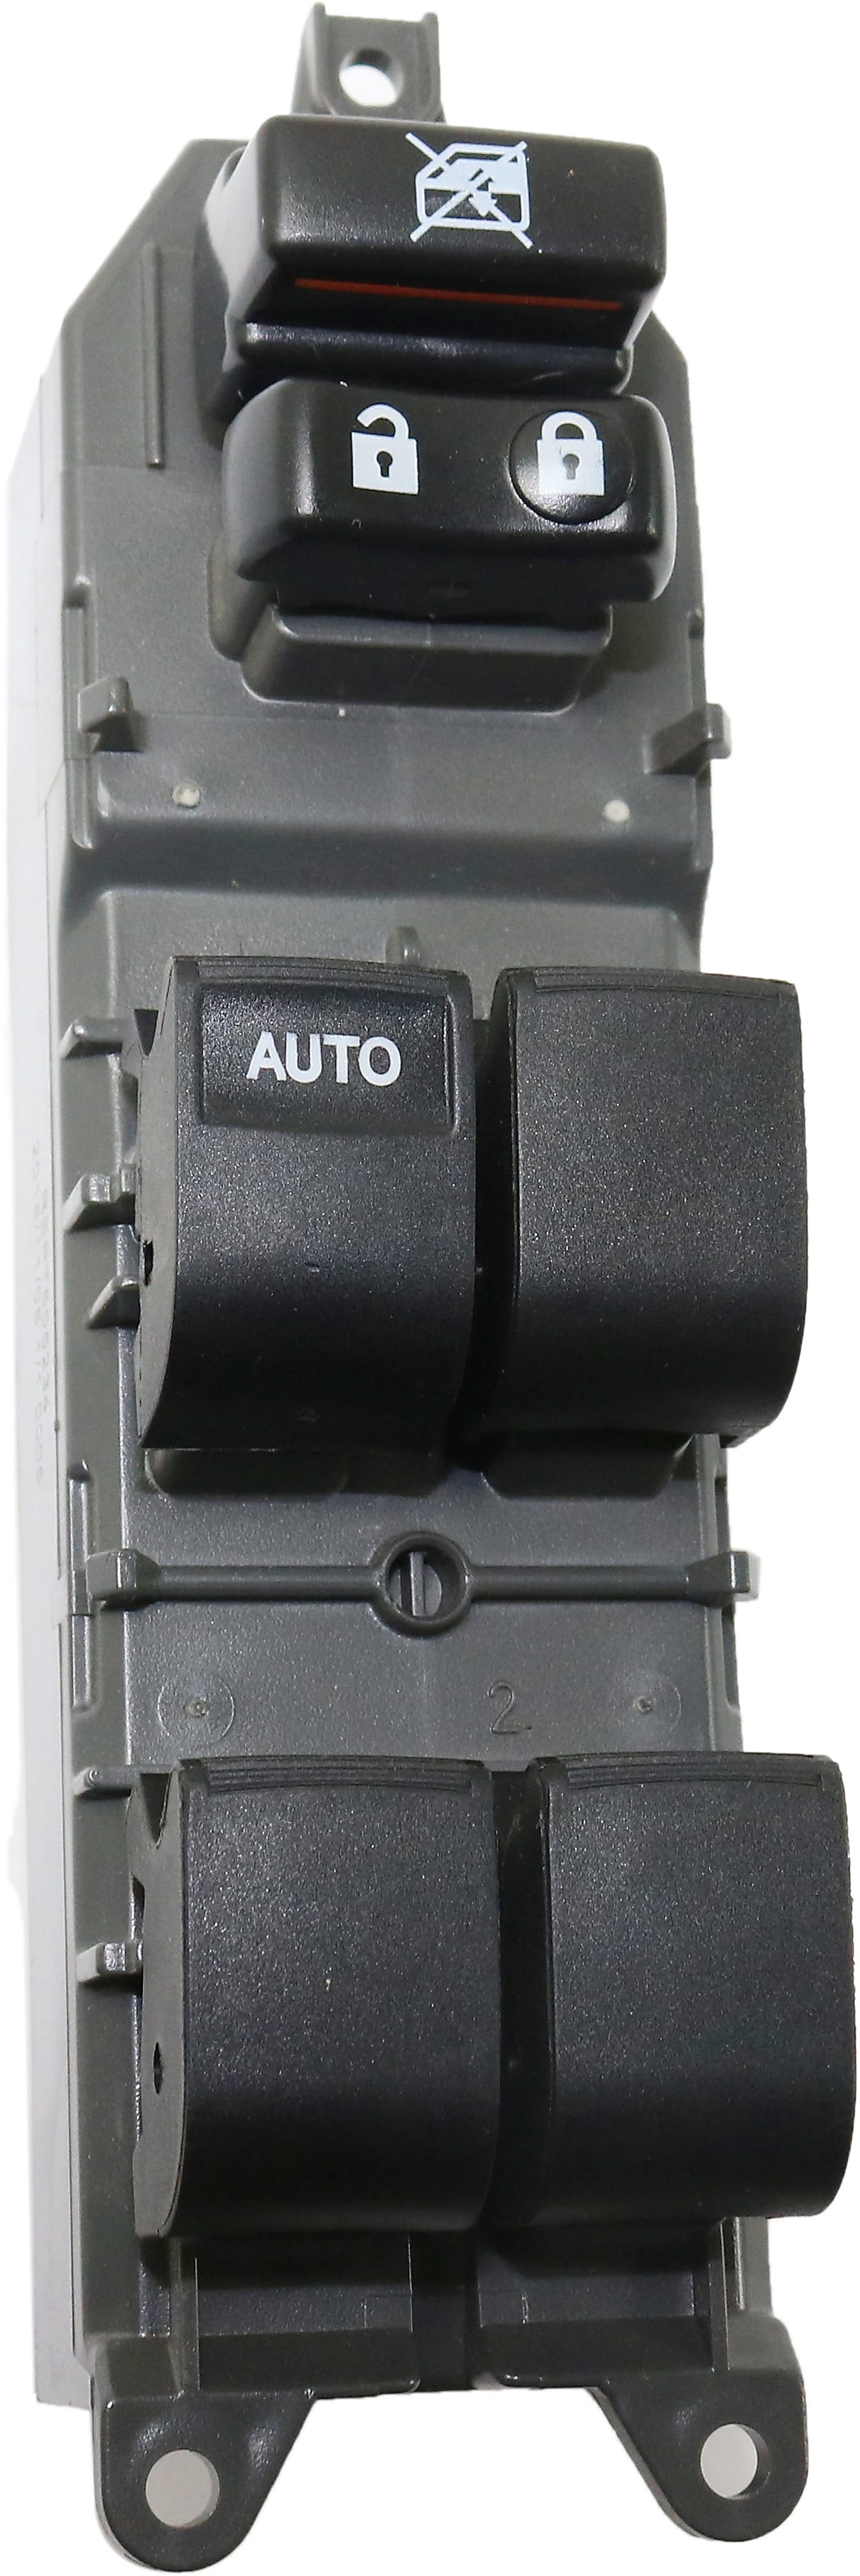 02 03 04 05 TOYOTA CAMRY DRIVER SIDE LEFT MASTER WINDOW SWITCH OEM TM4647 